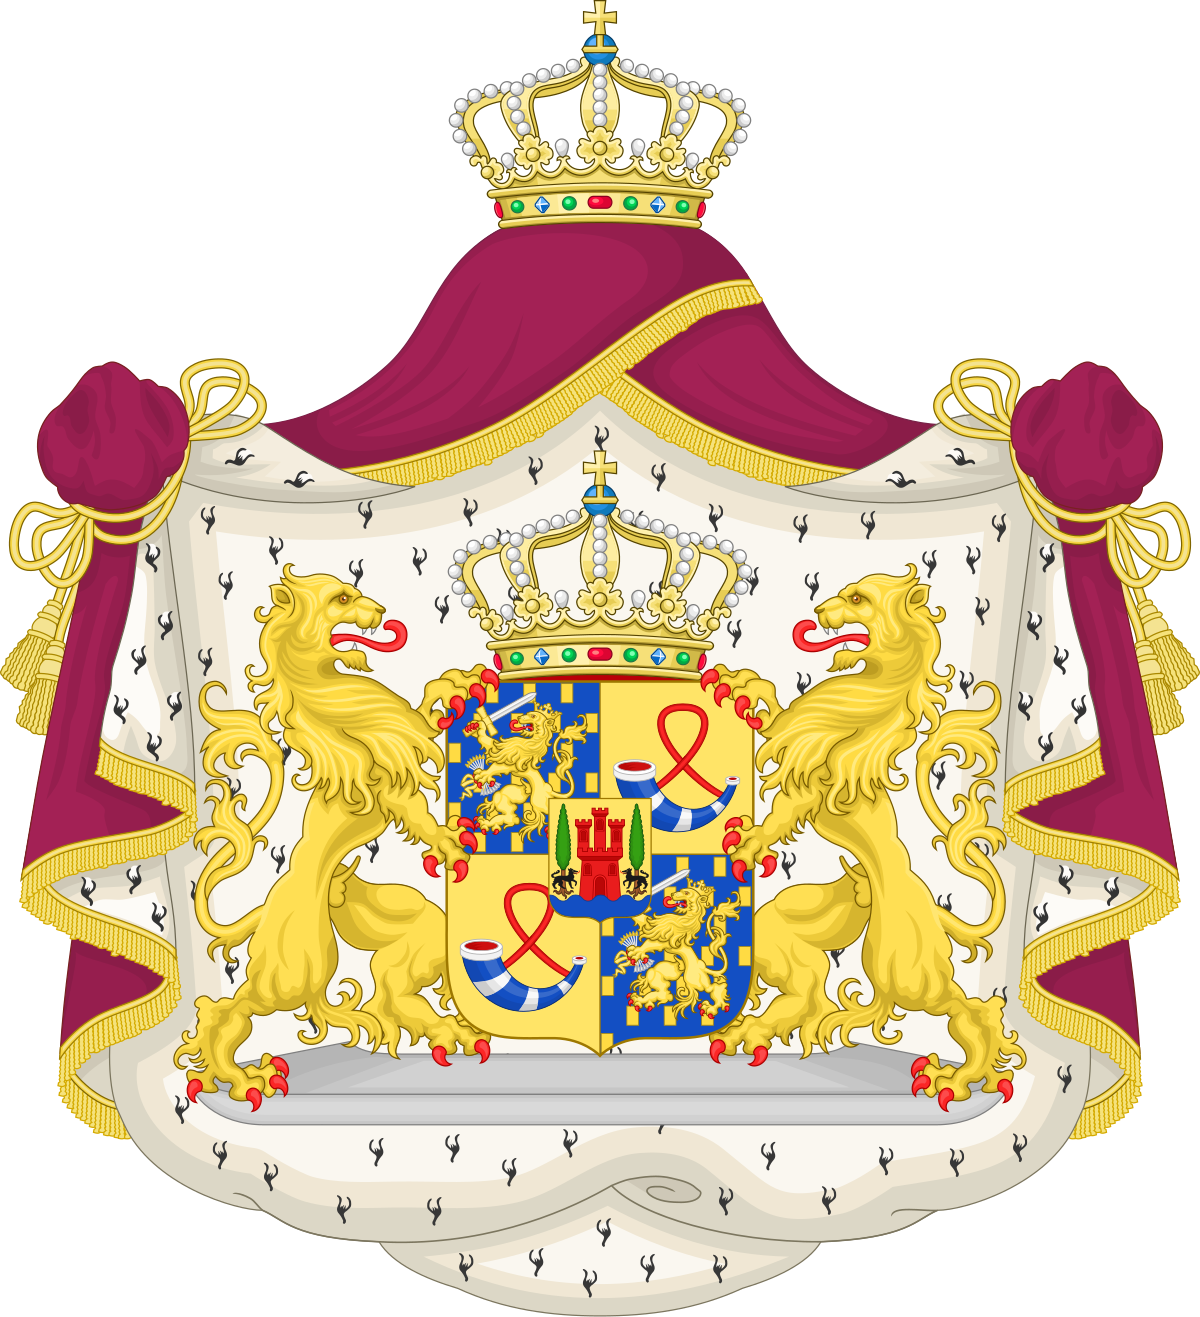 1200px-Coat_of_Arms_of_the_children_of_Willem-Alexander_of_the_Netherlands.svg.png